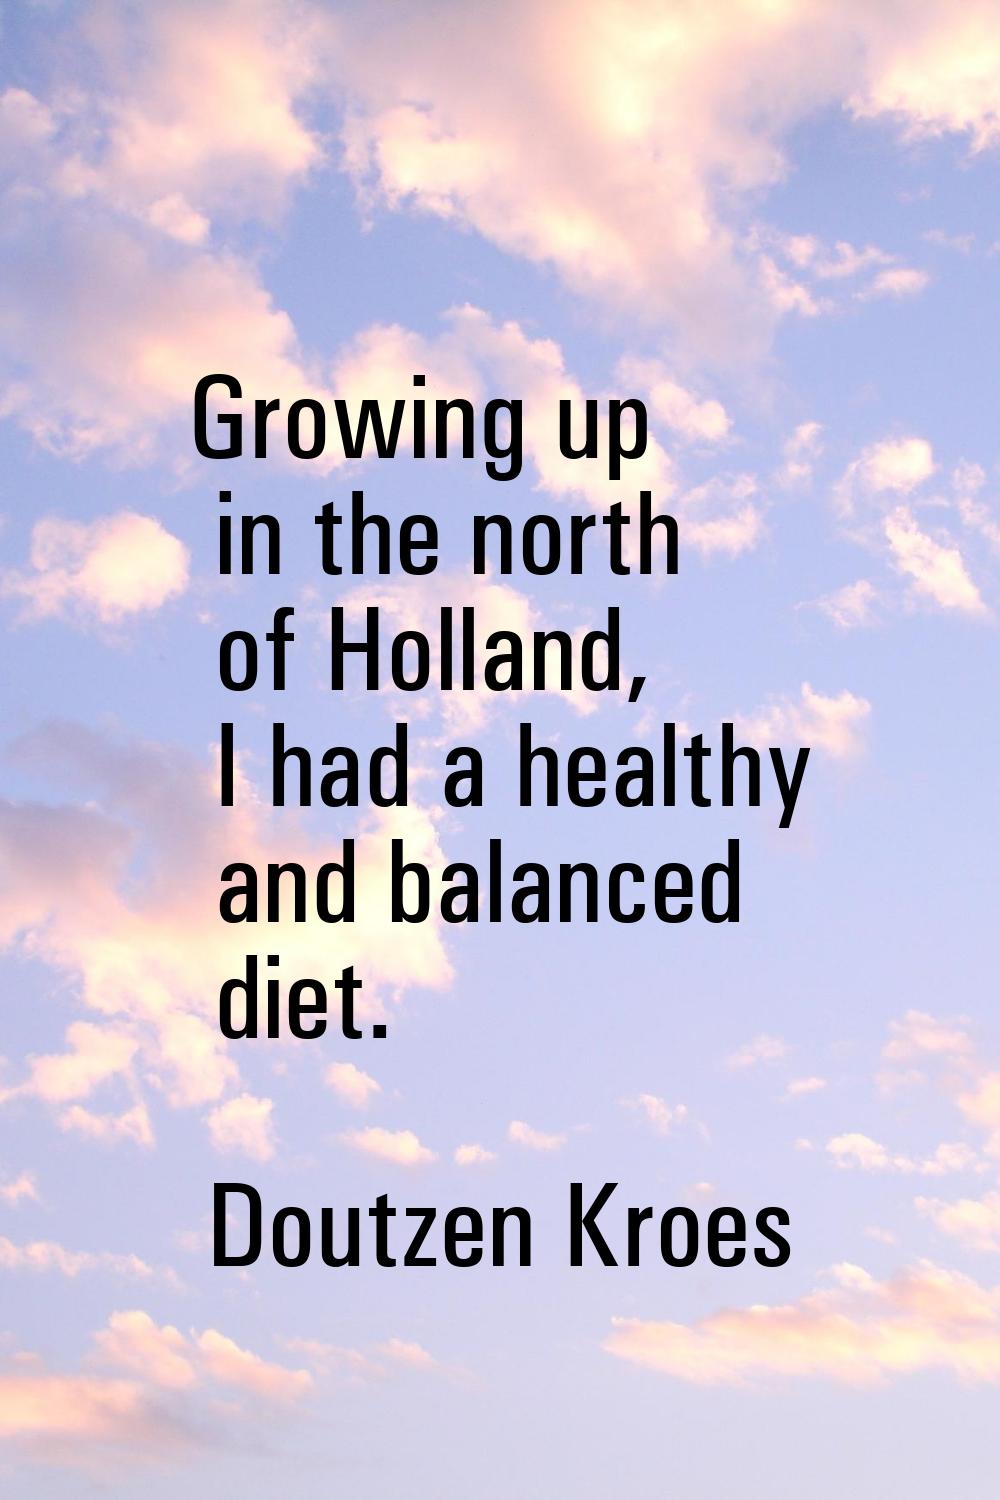 Growing up in the north of Holland, I had a healthy and balanced diet.